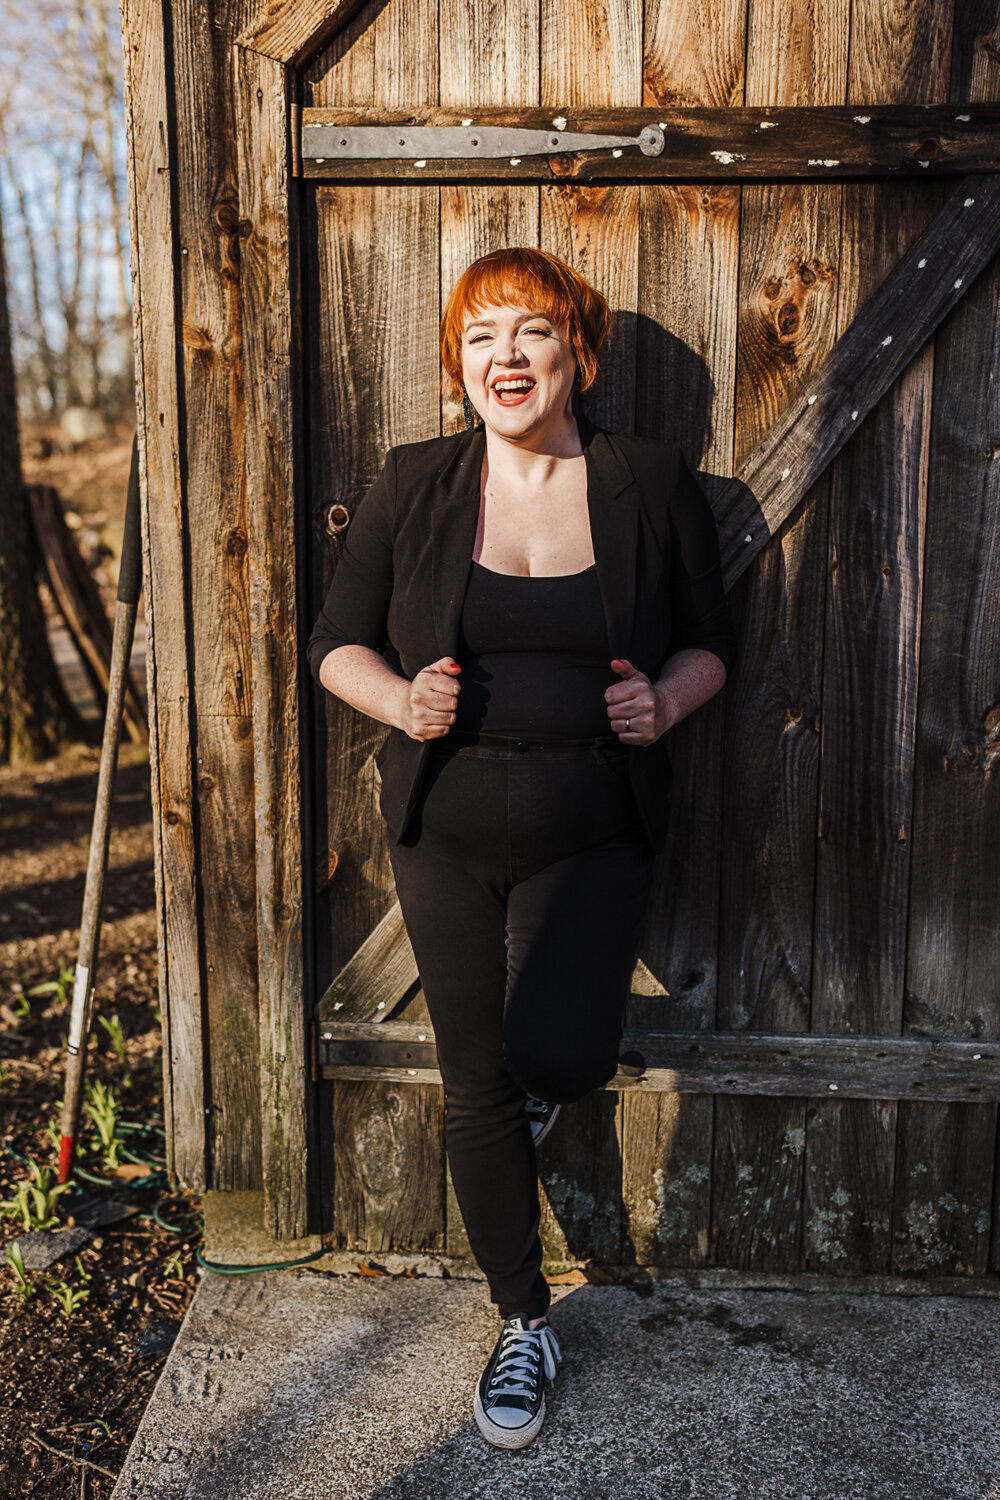 woman dressed in black laughs against barn wall